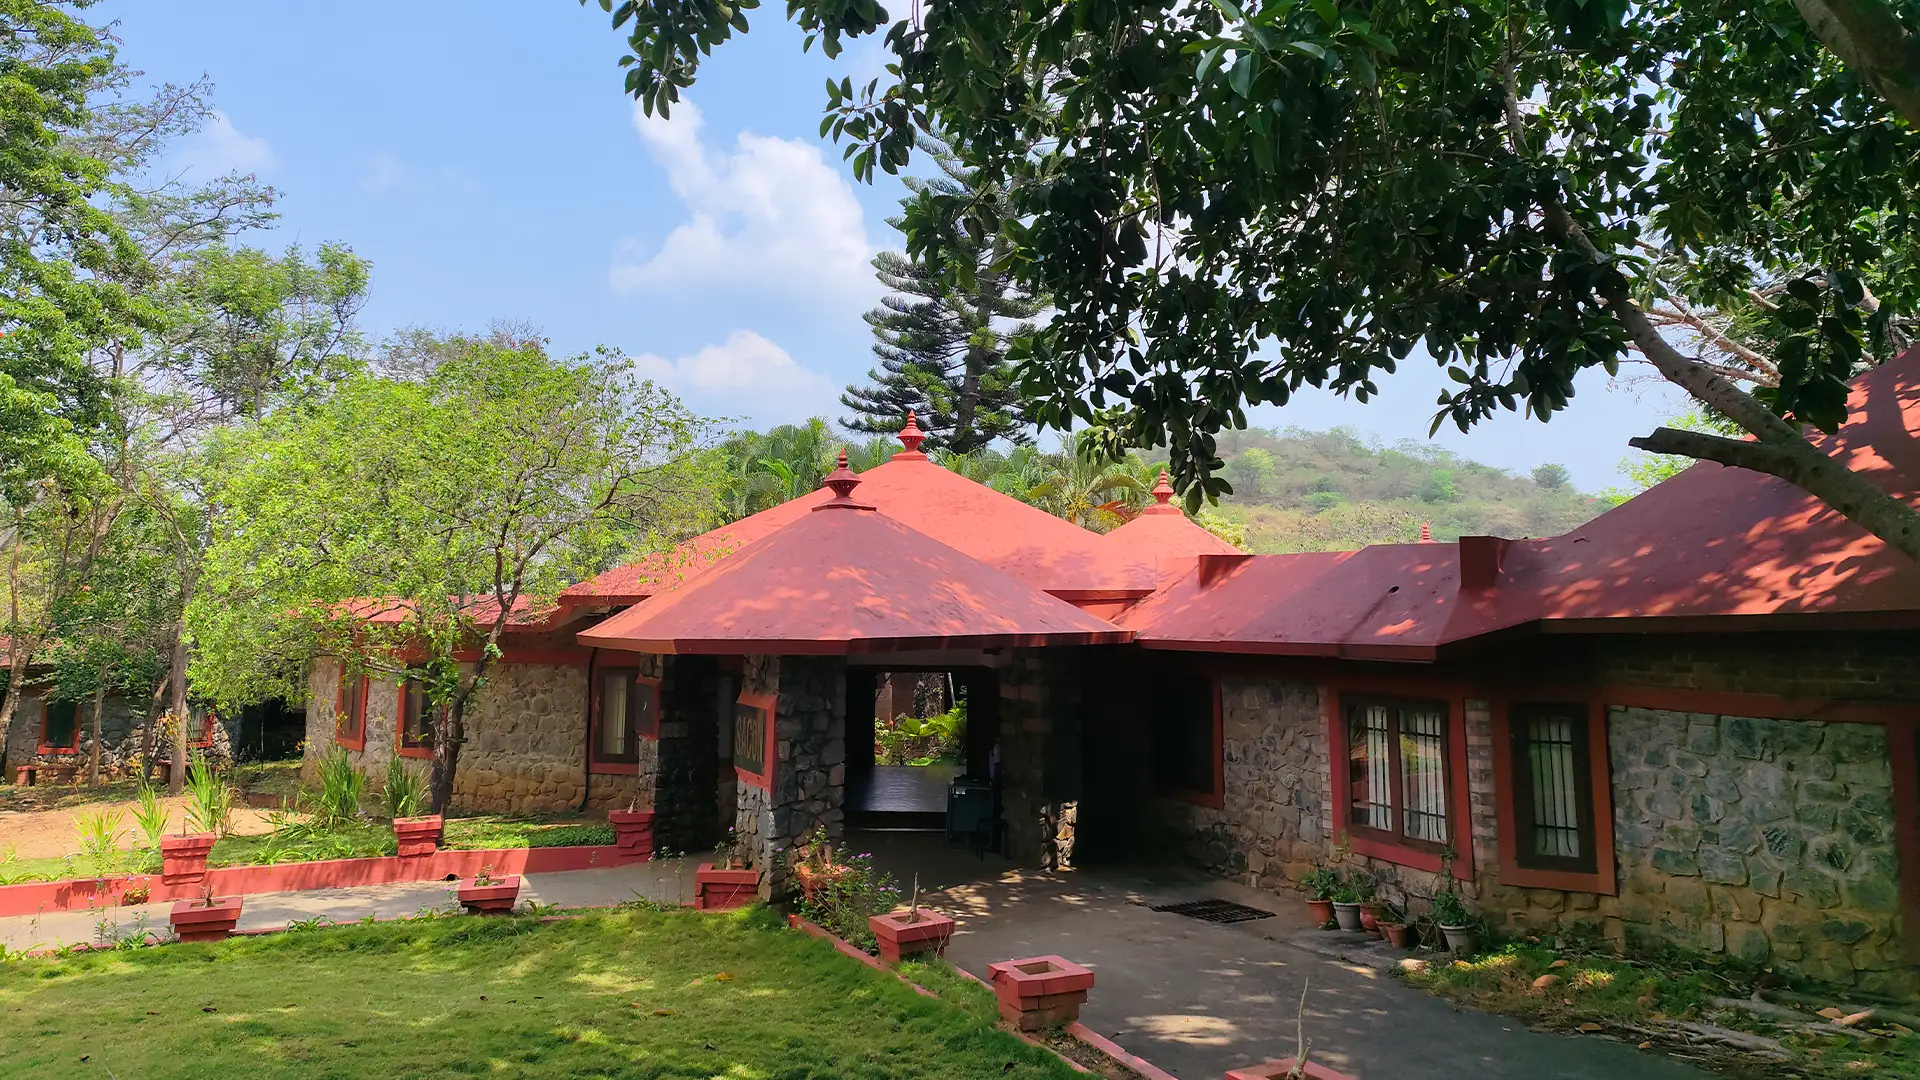 Salim Ali Center for Ornithology and Natural History